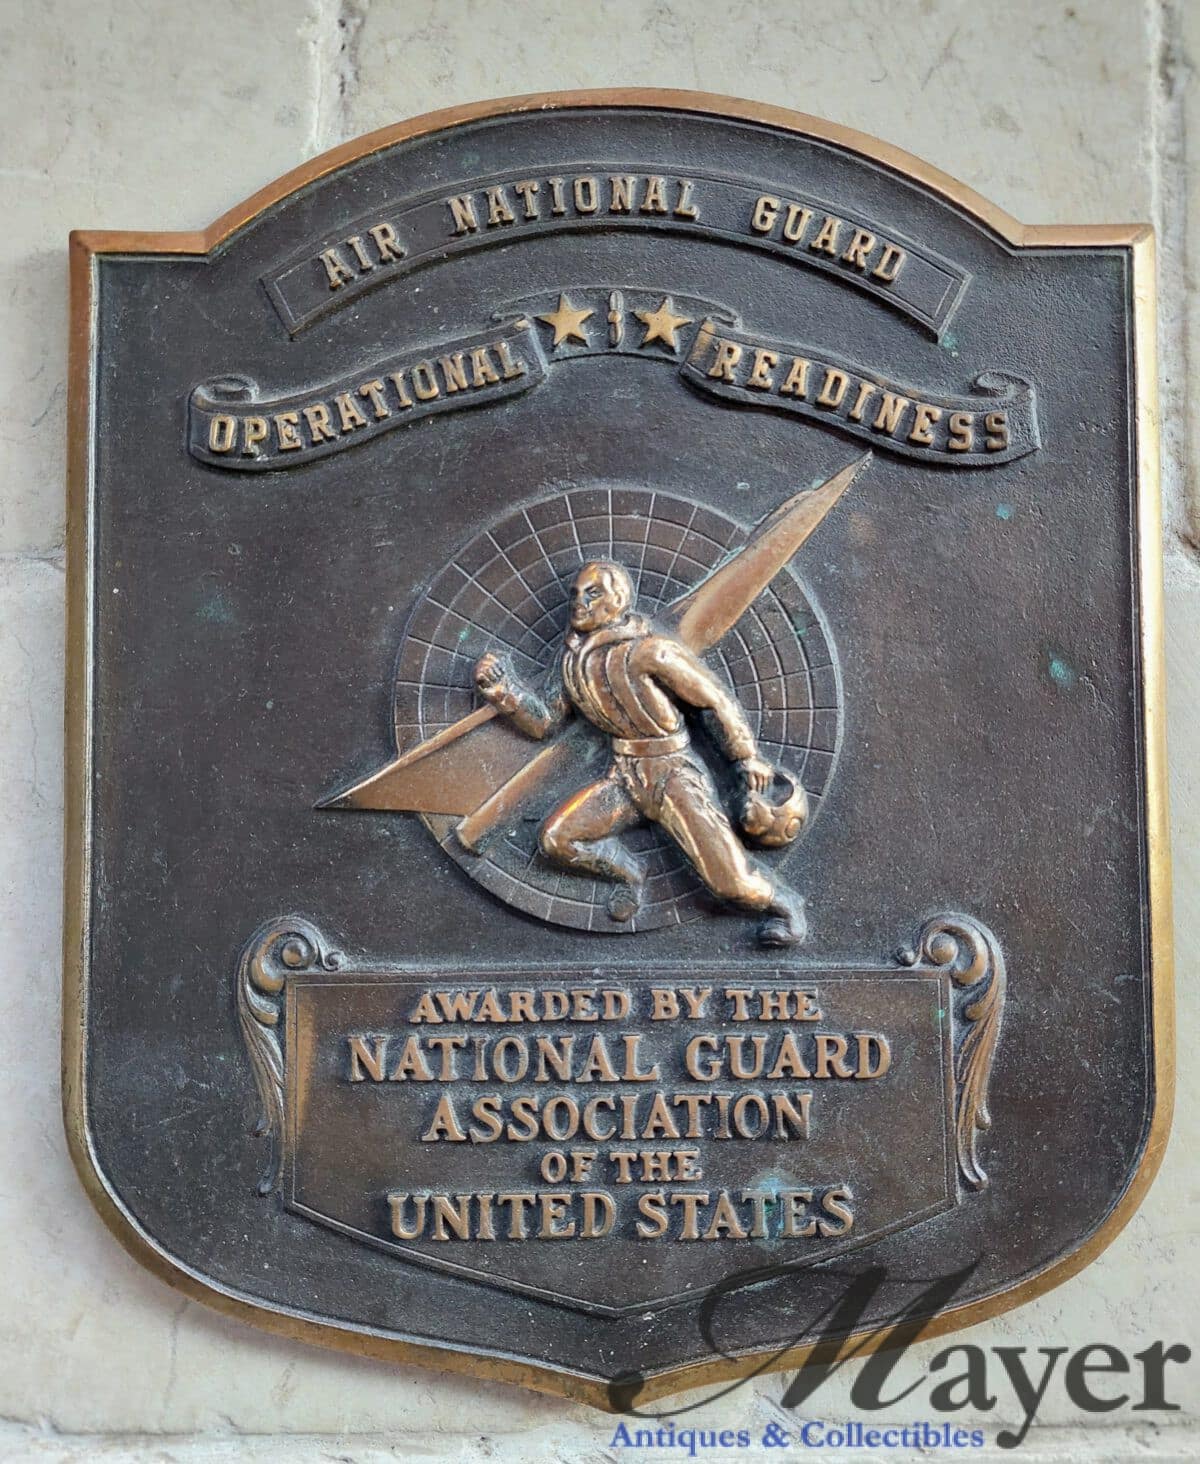 Air National Guard operational readiness award plaque awarded by the National Guard Association of the United States.